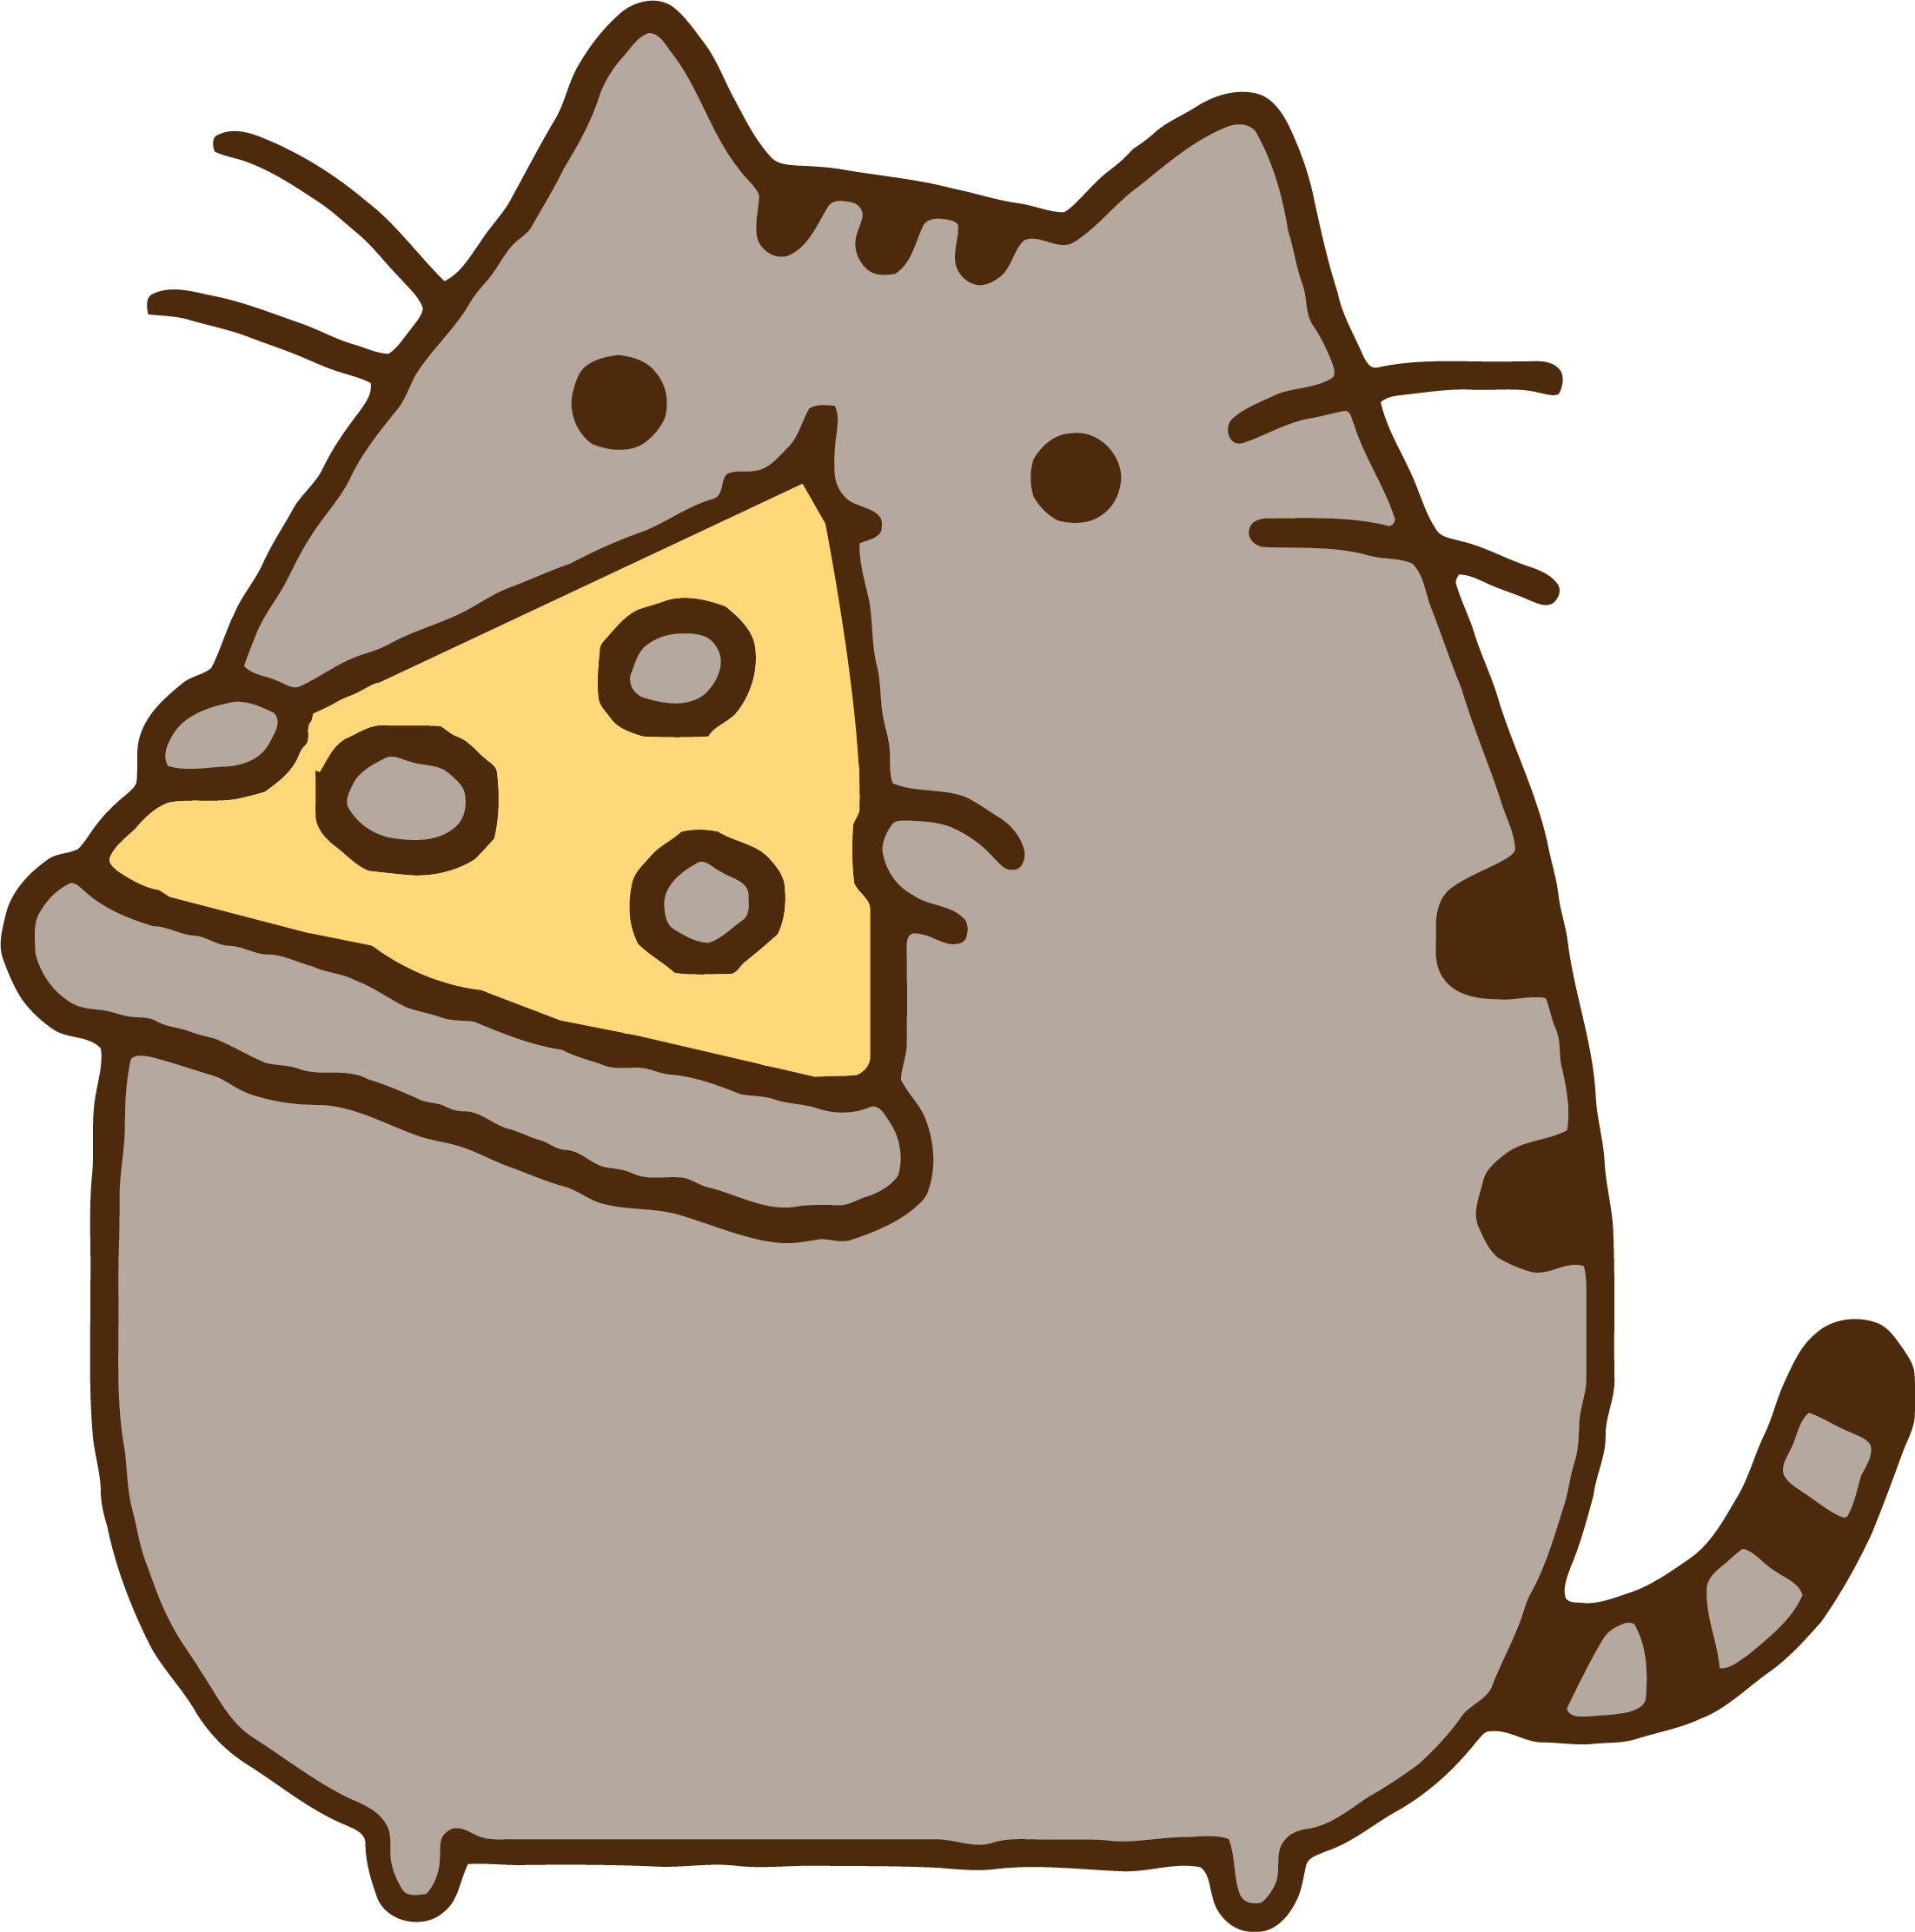 Eating Pizza Cat Clipart Png - ClipartlyClipartly